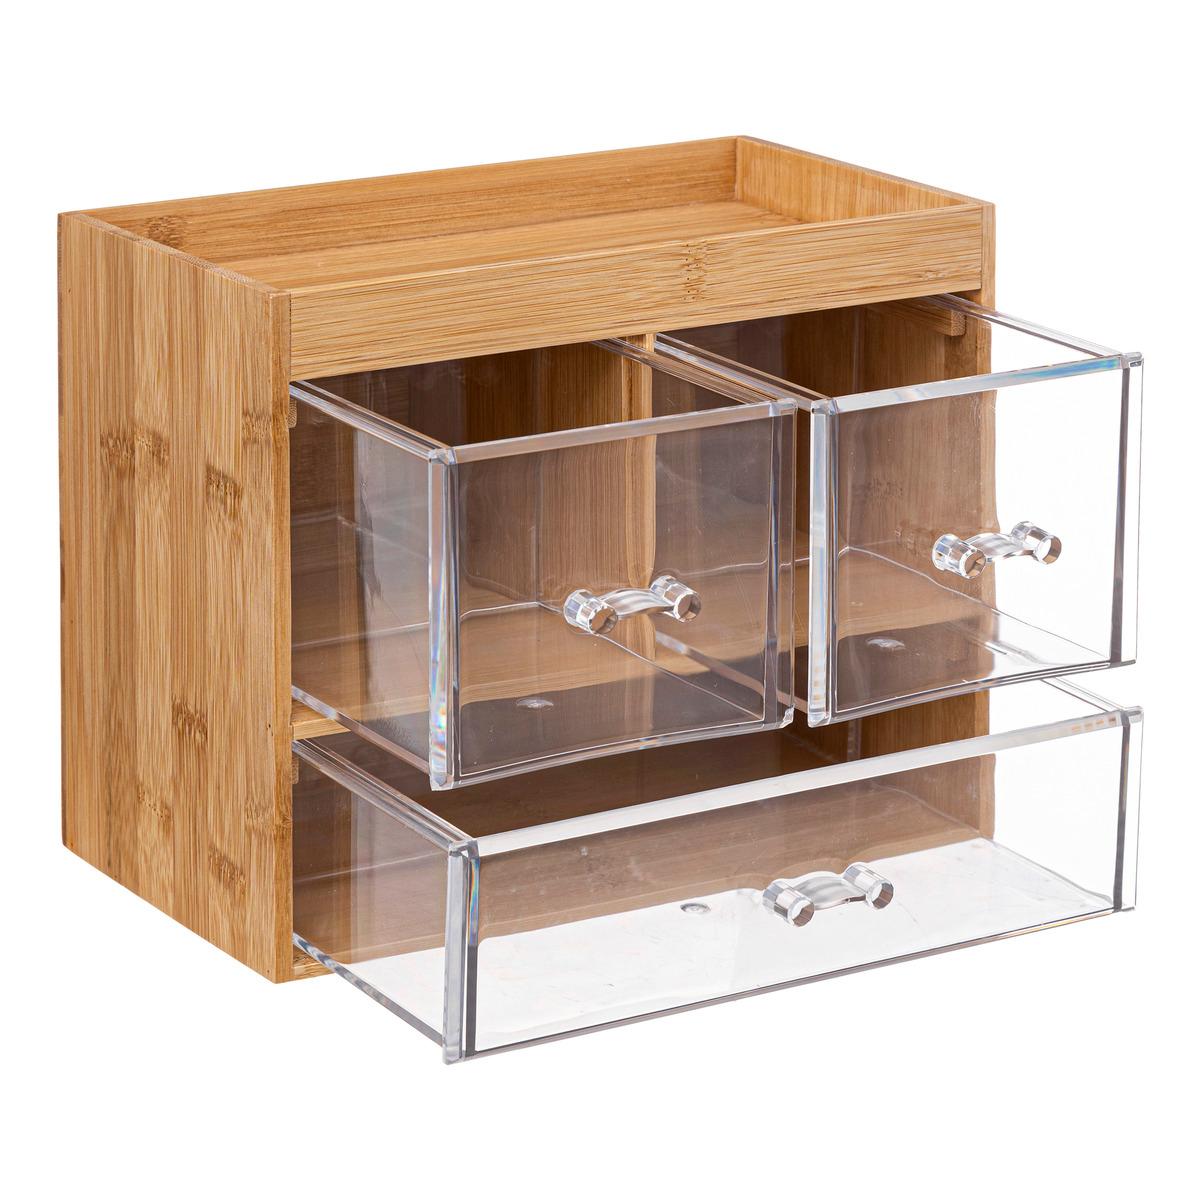 Selena bamboo 3 drawer clear organizer box Furniture for Professionals -  Decoration Brands